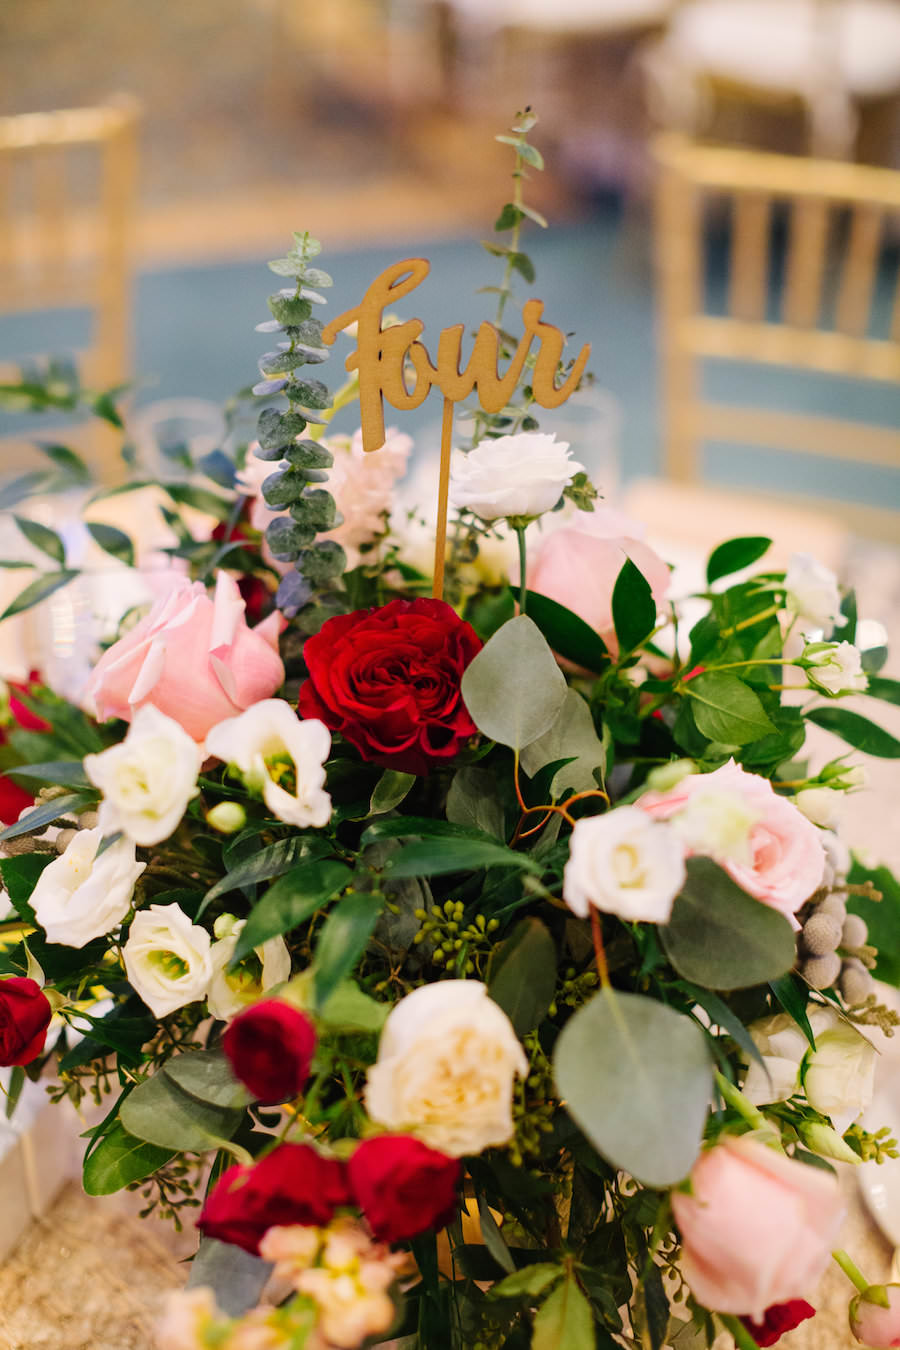 Wedding Reception Centerpiece Bouquet with Blush Pink, Red, and White Roses with Greenery and Stylish Gold Table Number